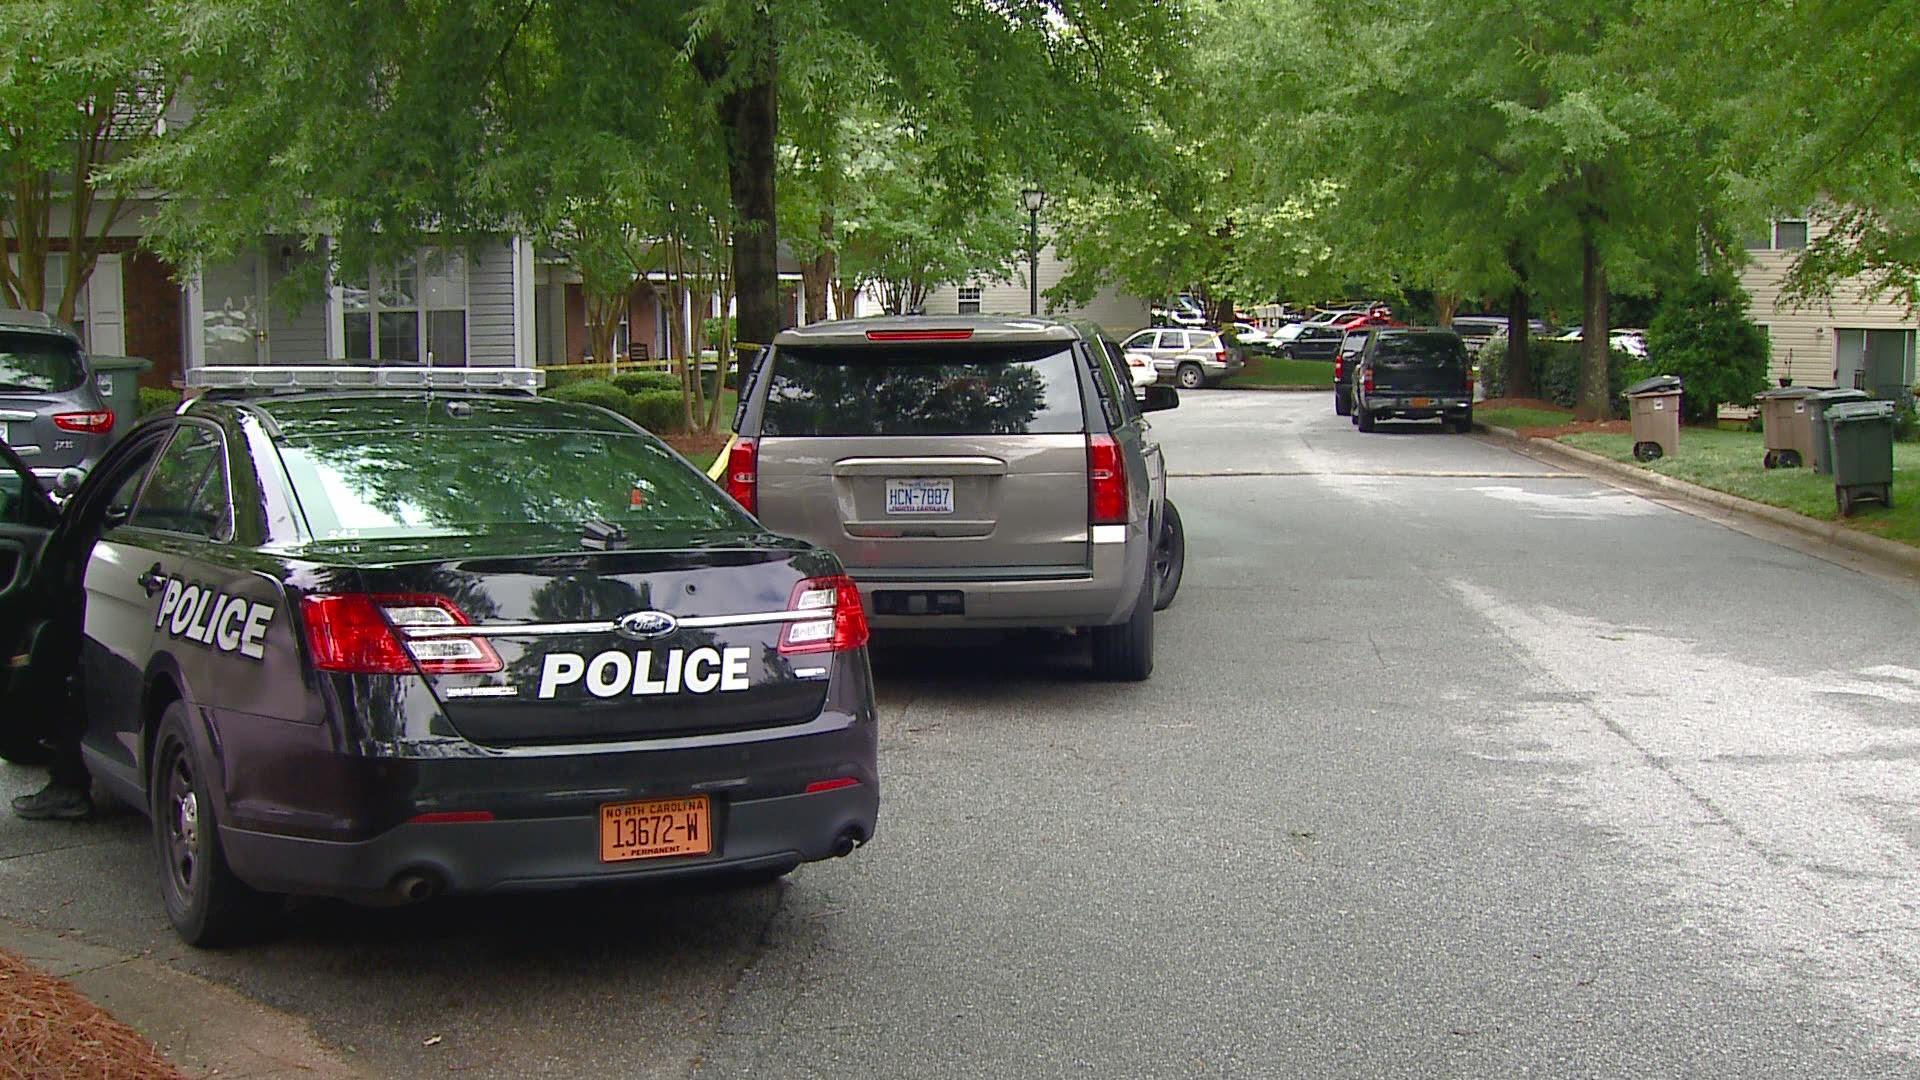 Police investigate after one man was killed and another was left in critical condition after a shooting in Greensboro on May 28, 2020.